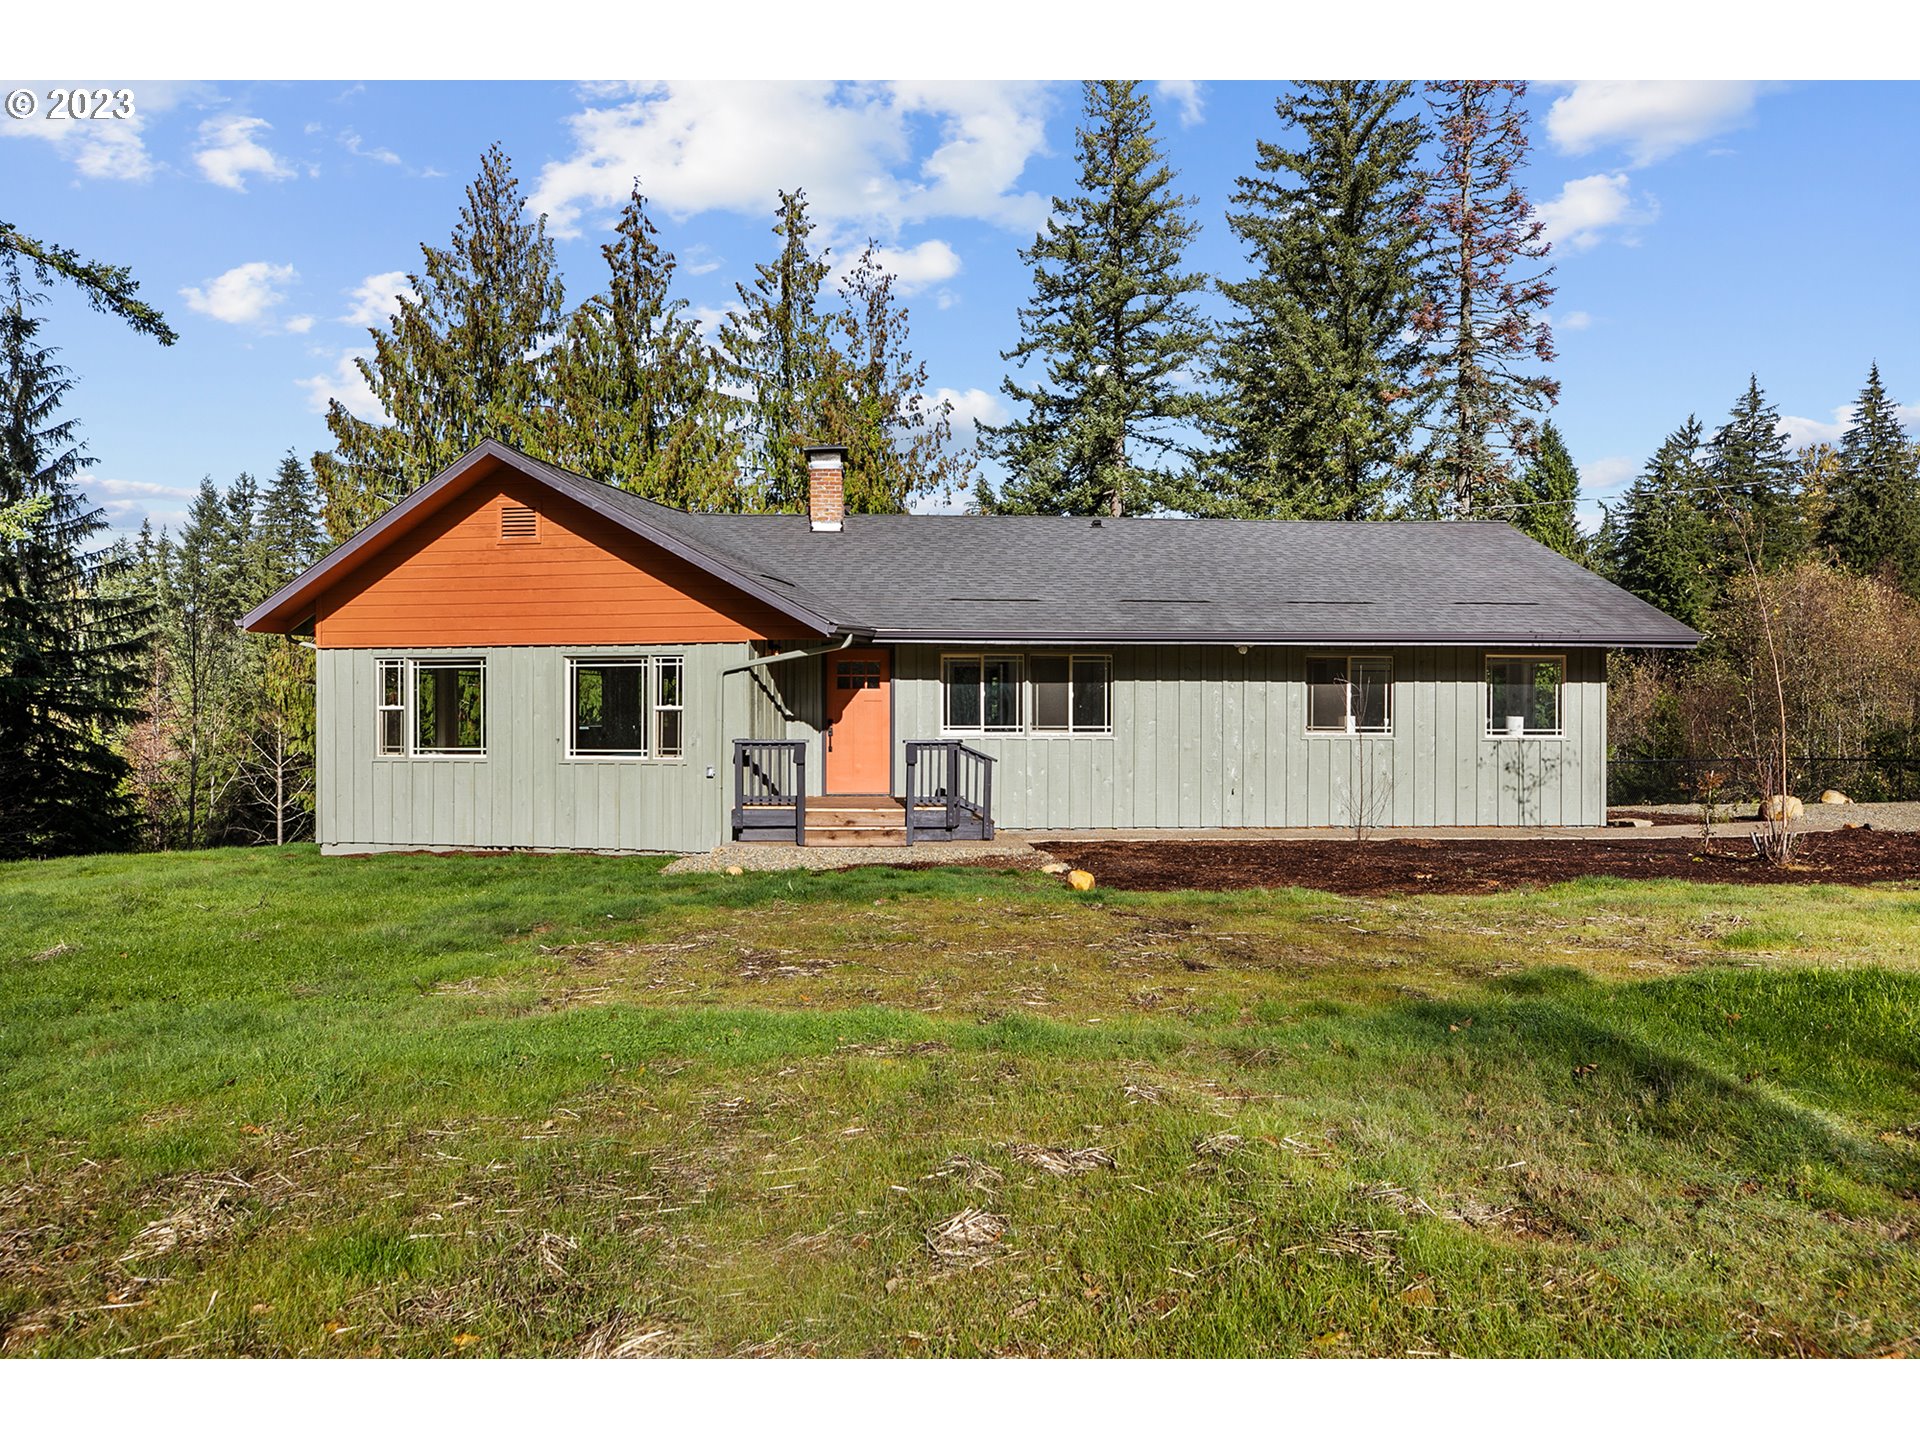 26392 S ELWOOD RD, Colton, OR 